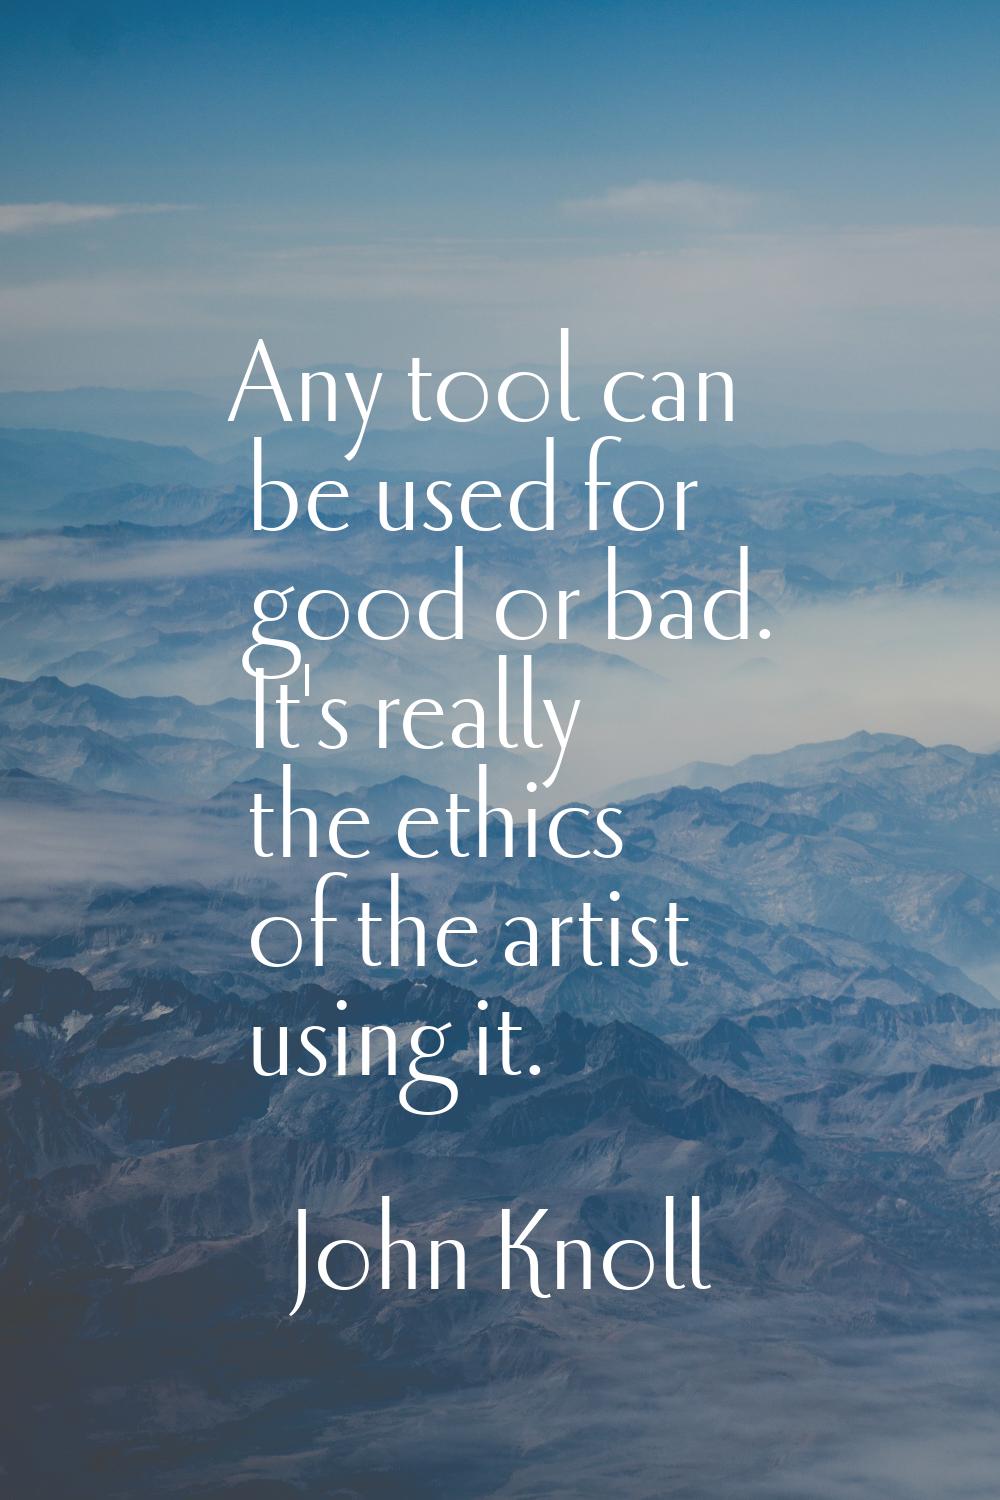 Any tool can be used for good or bad. It's really the ethics of the artist using it.